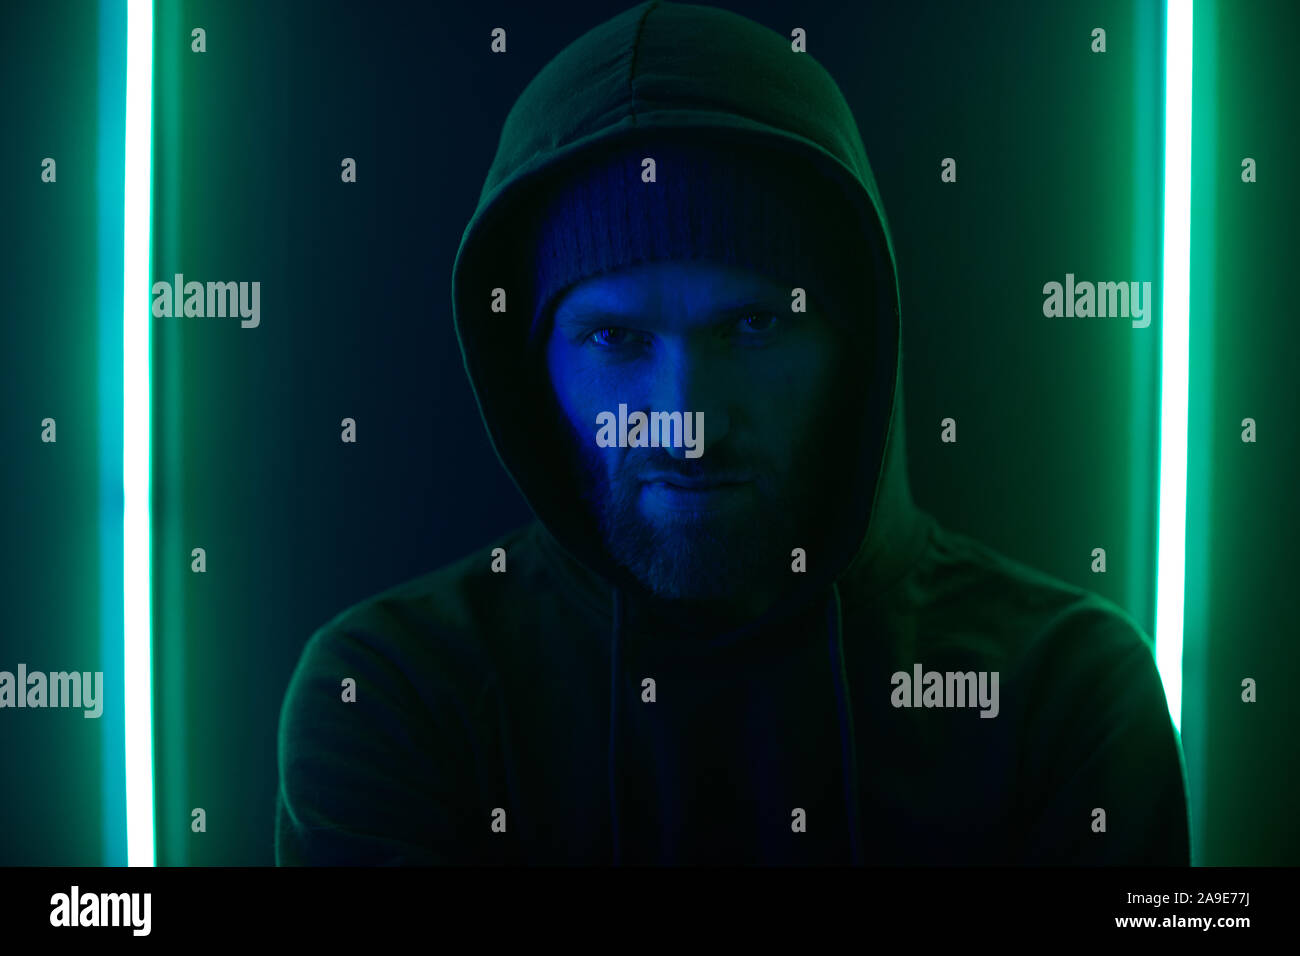 Portrait of young bearded man in dark clothing wearing hoody standing against the wall with green light Stock Photo